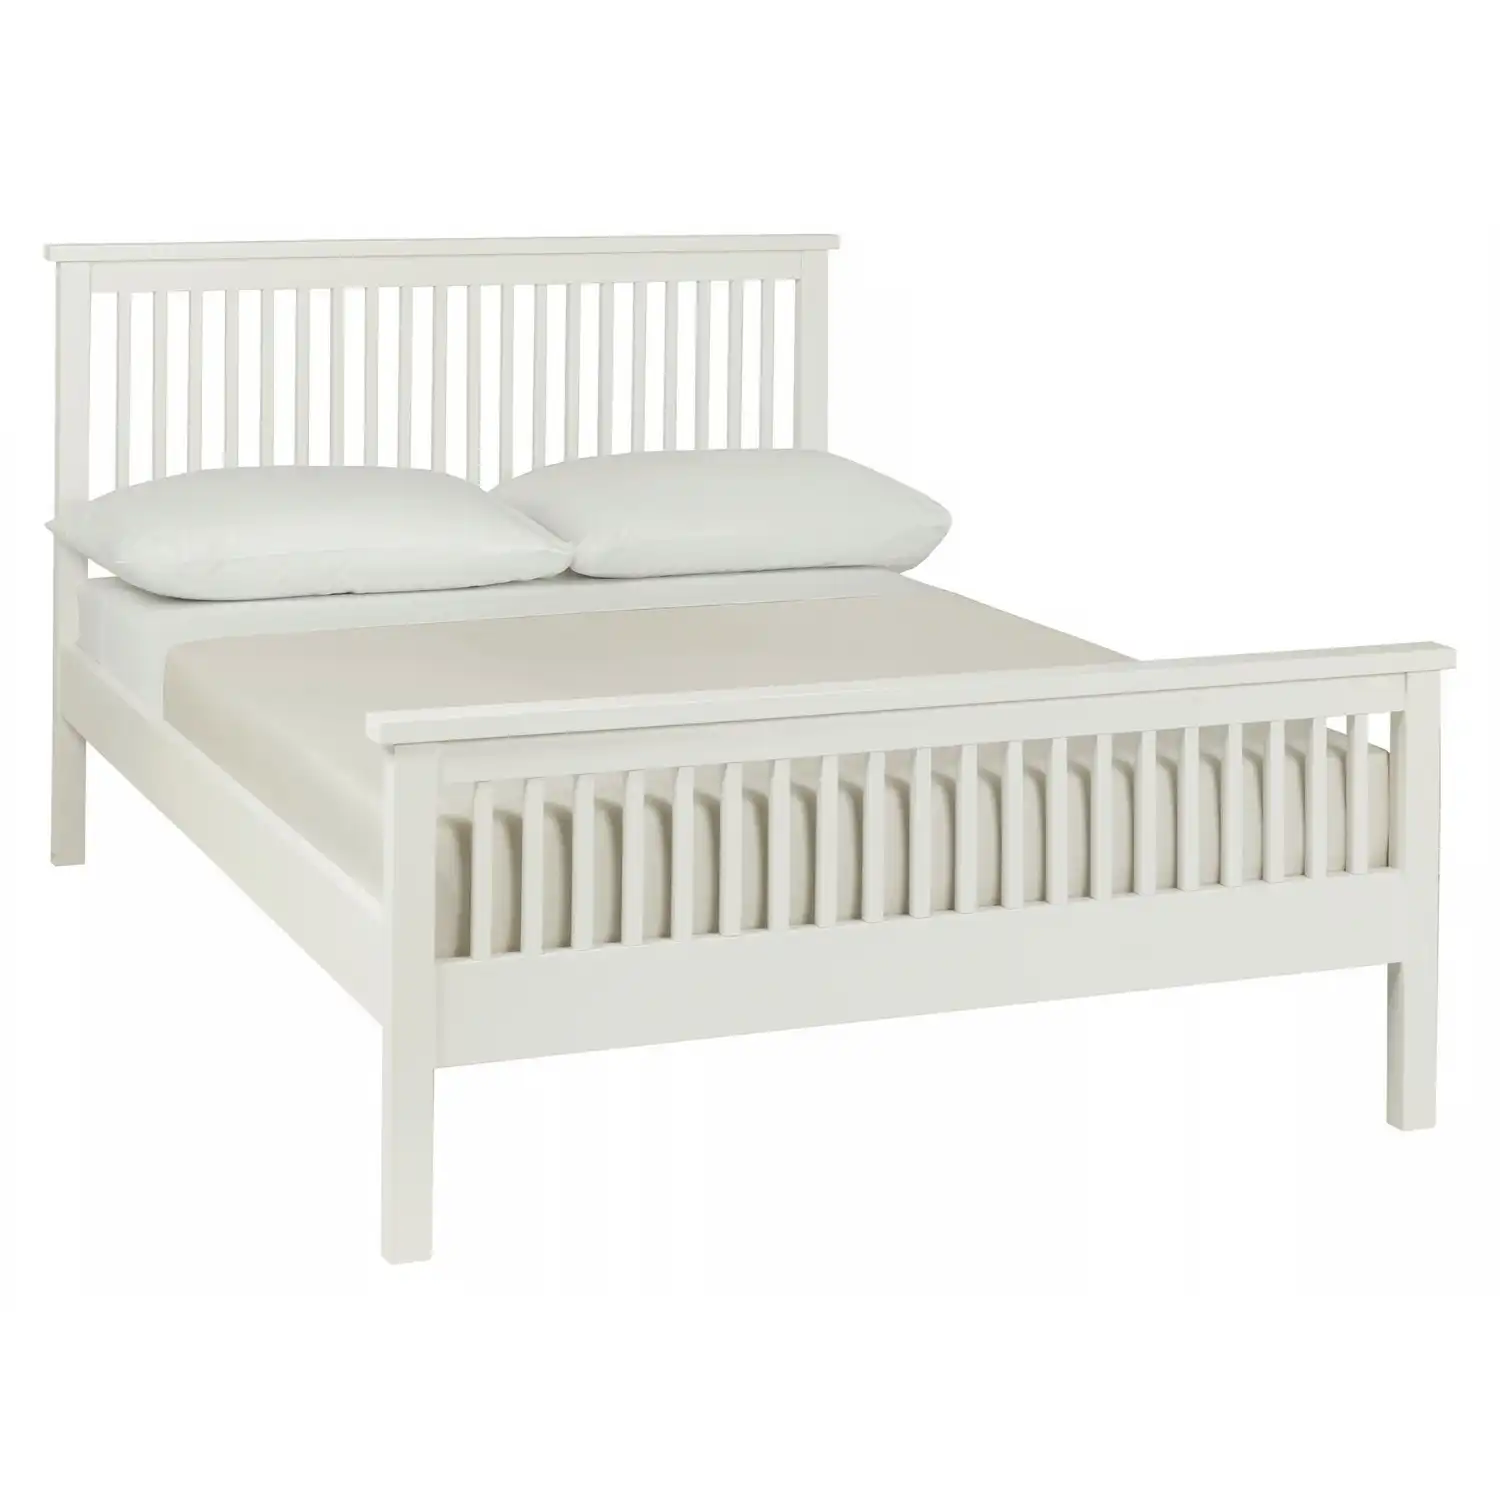 White Painted Double Bed High Foot End